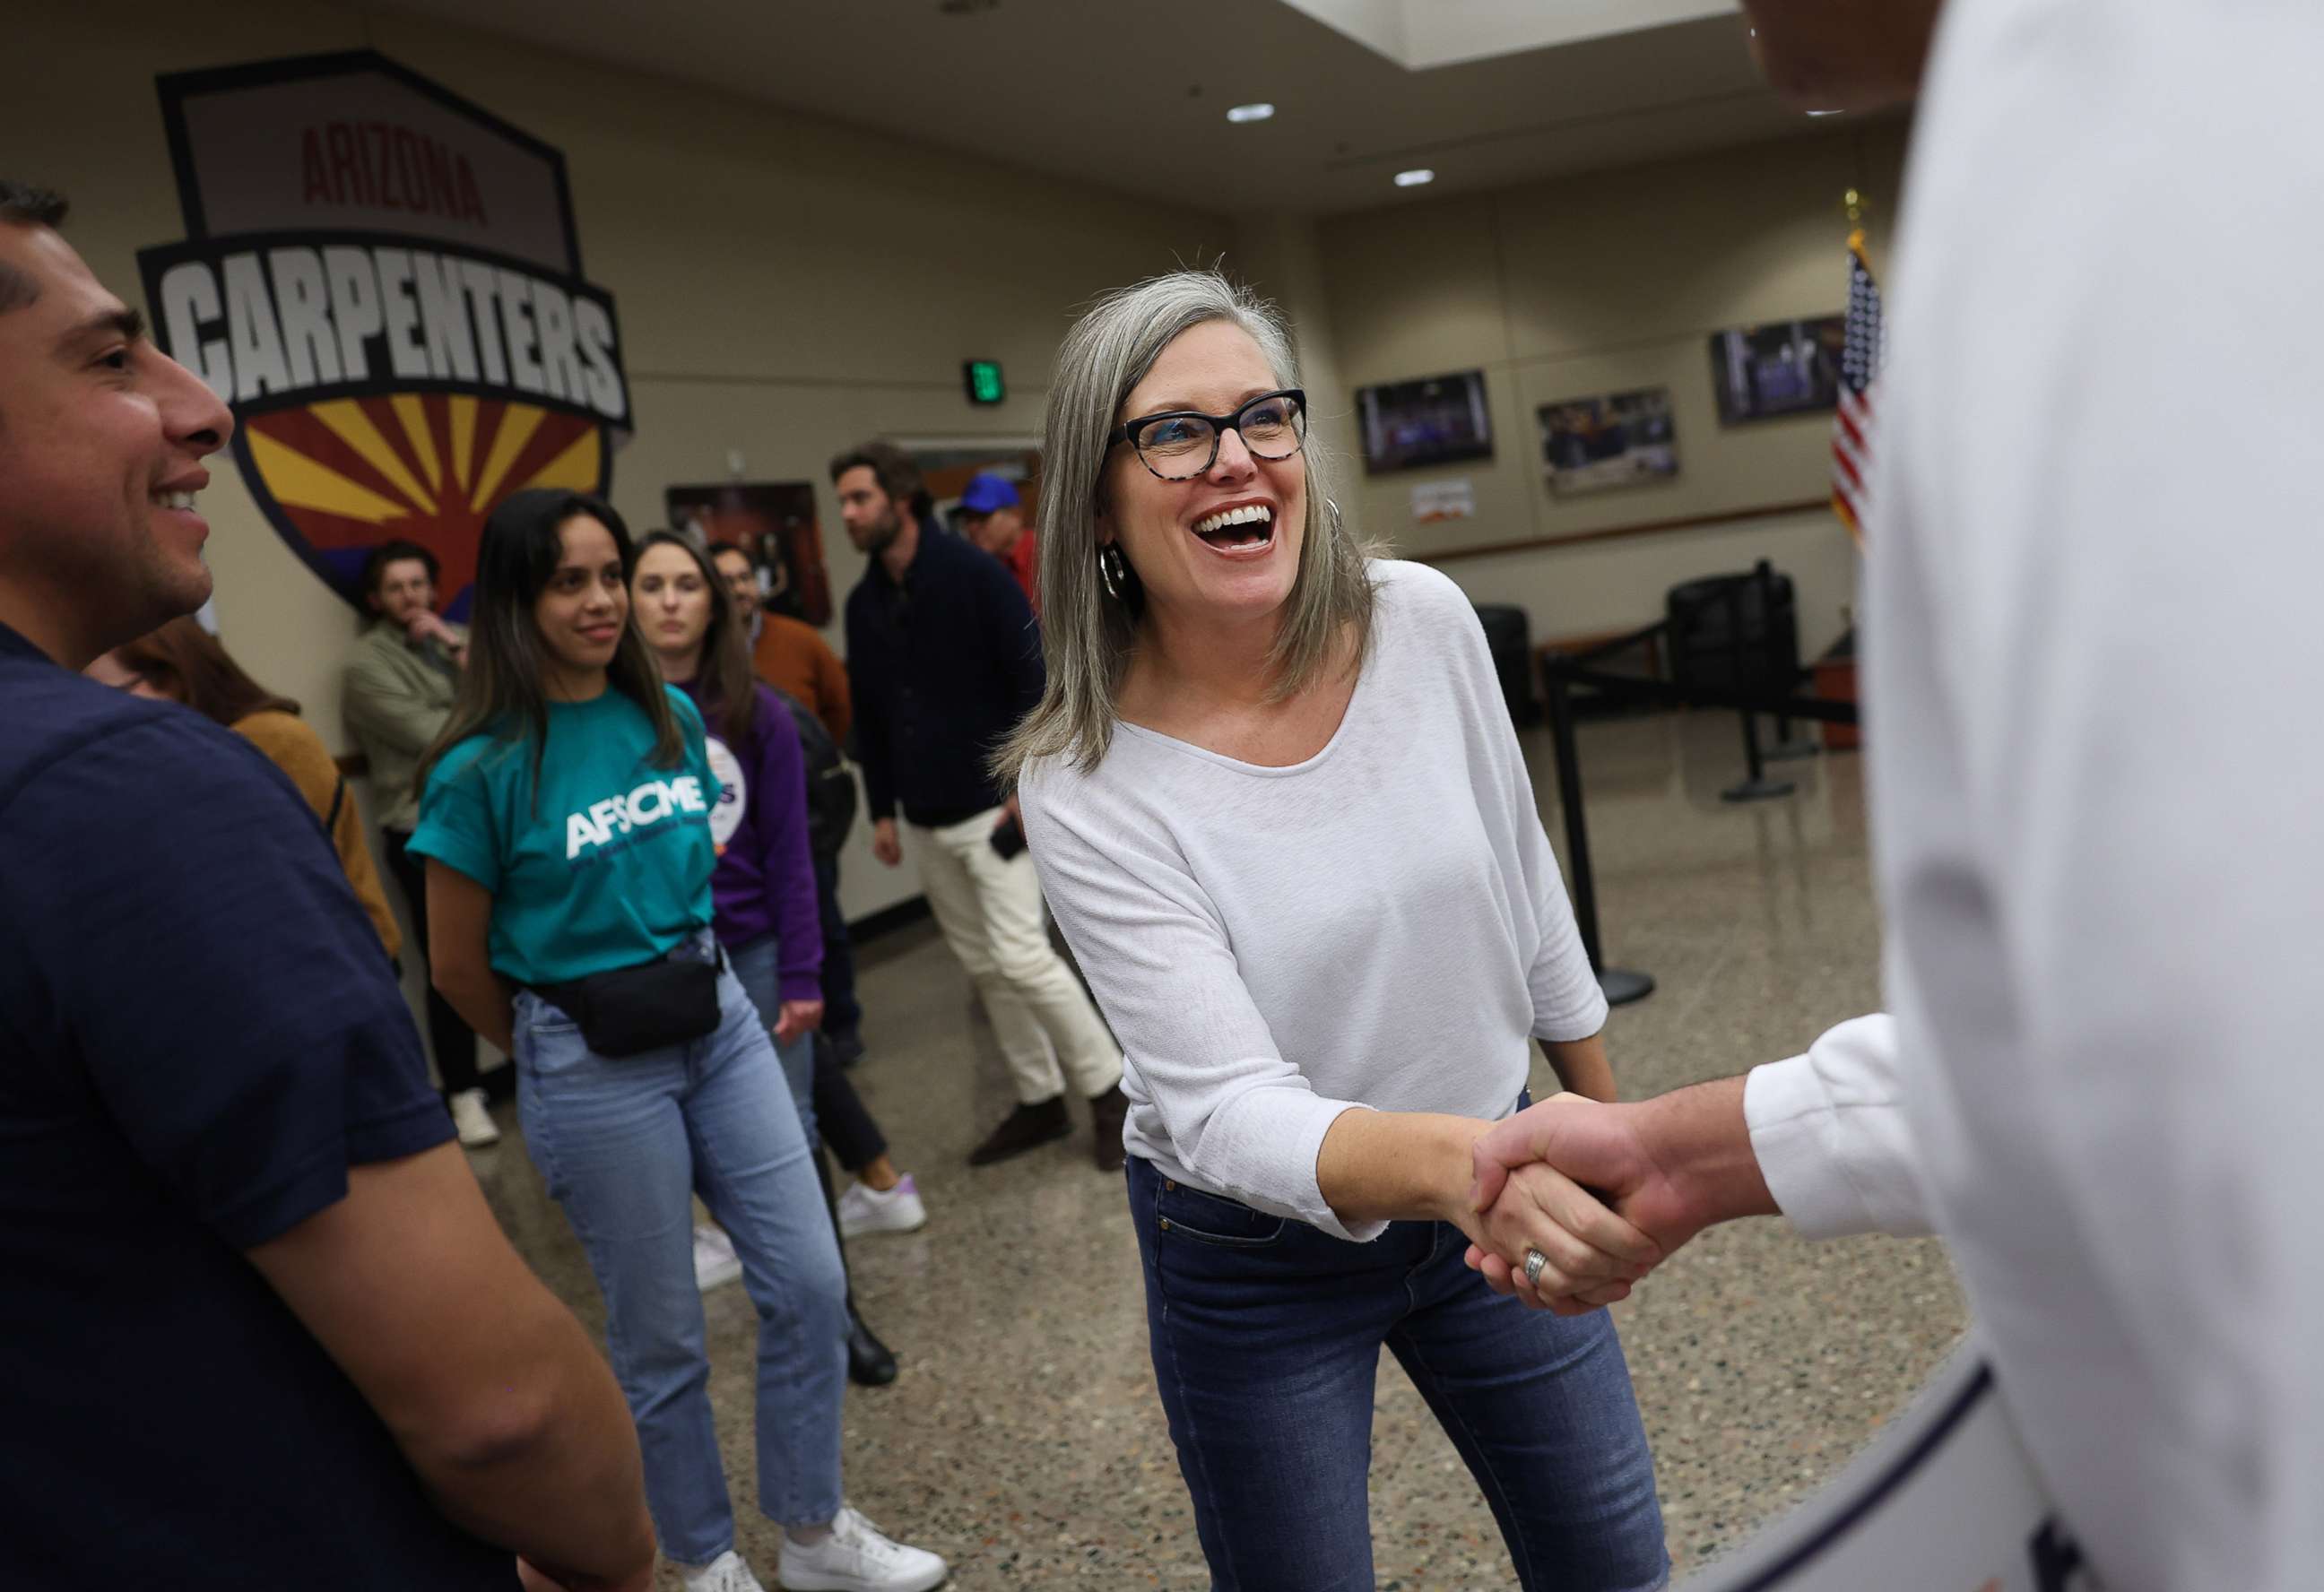 PHOTO: Arizona Democratic gubernatorial candidate Katie Hobbs greets supporters during a campaign event at the Carpenters Local Union 1912 headquarters, Nov. 5, 2022, in Phoenix.